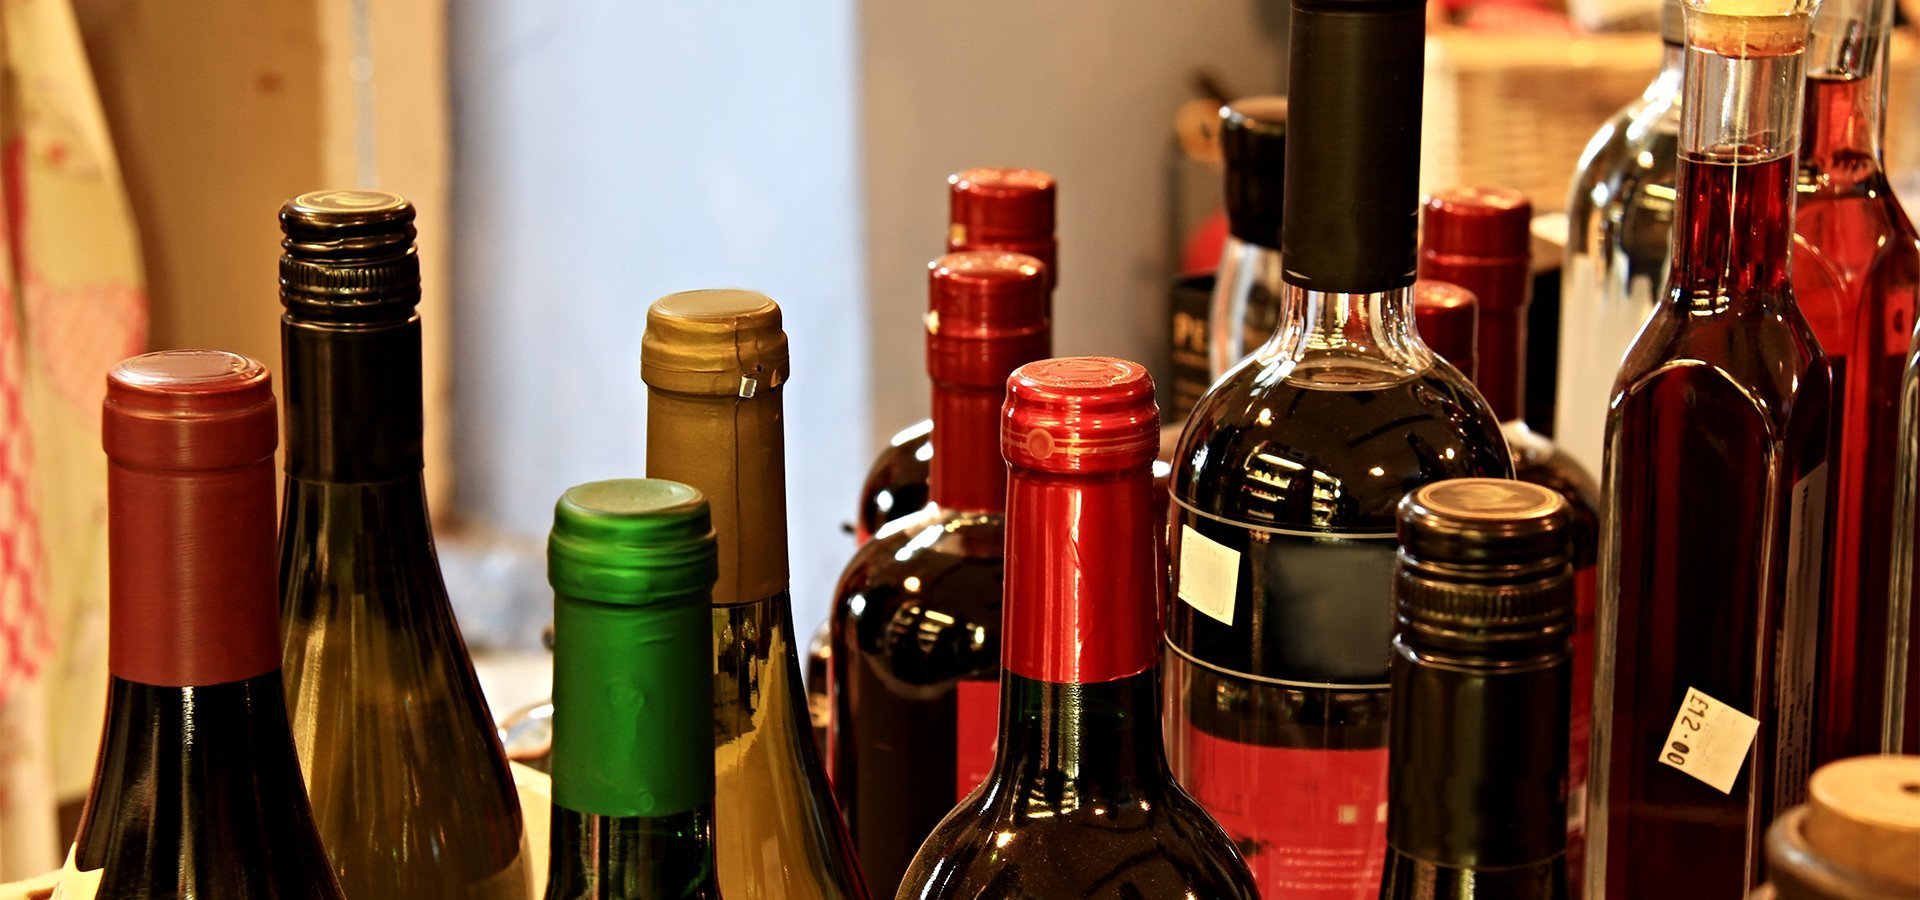 a bottles of alcohol make people think about recovery in restaurants